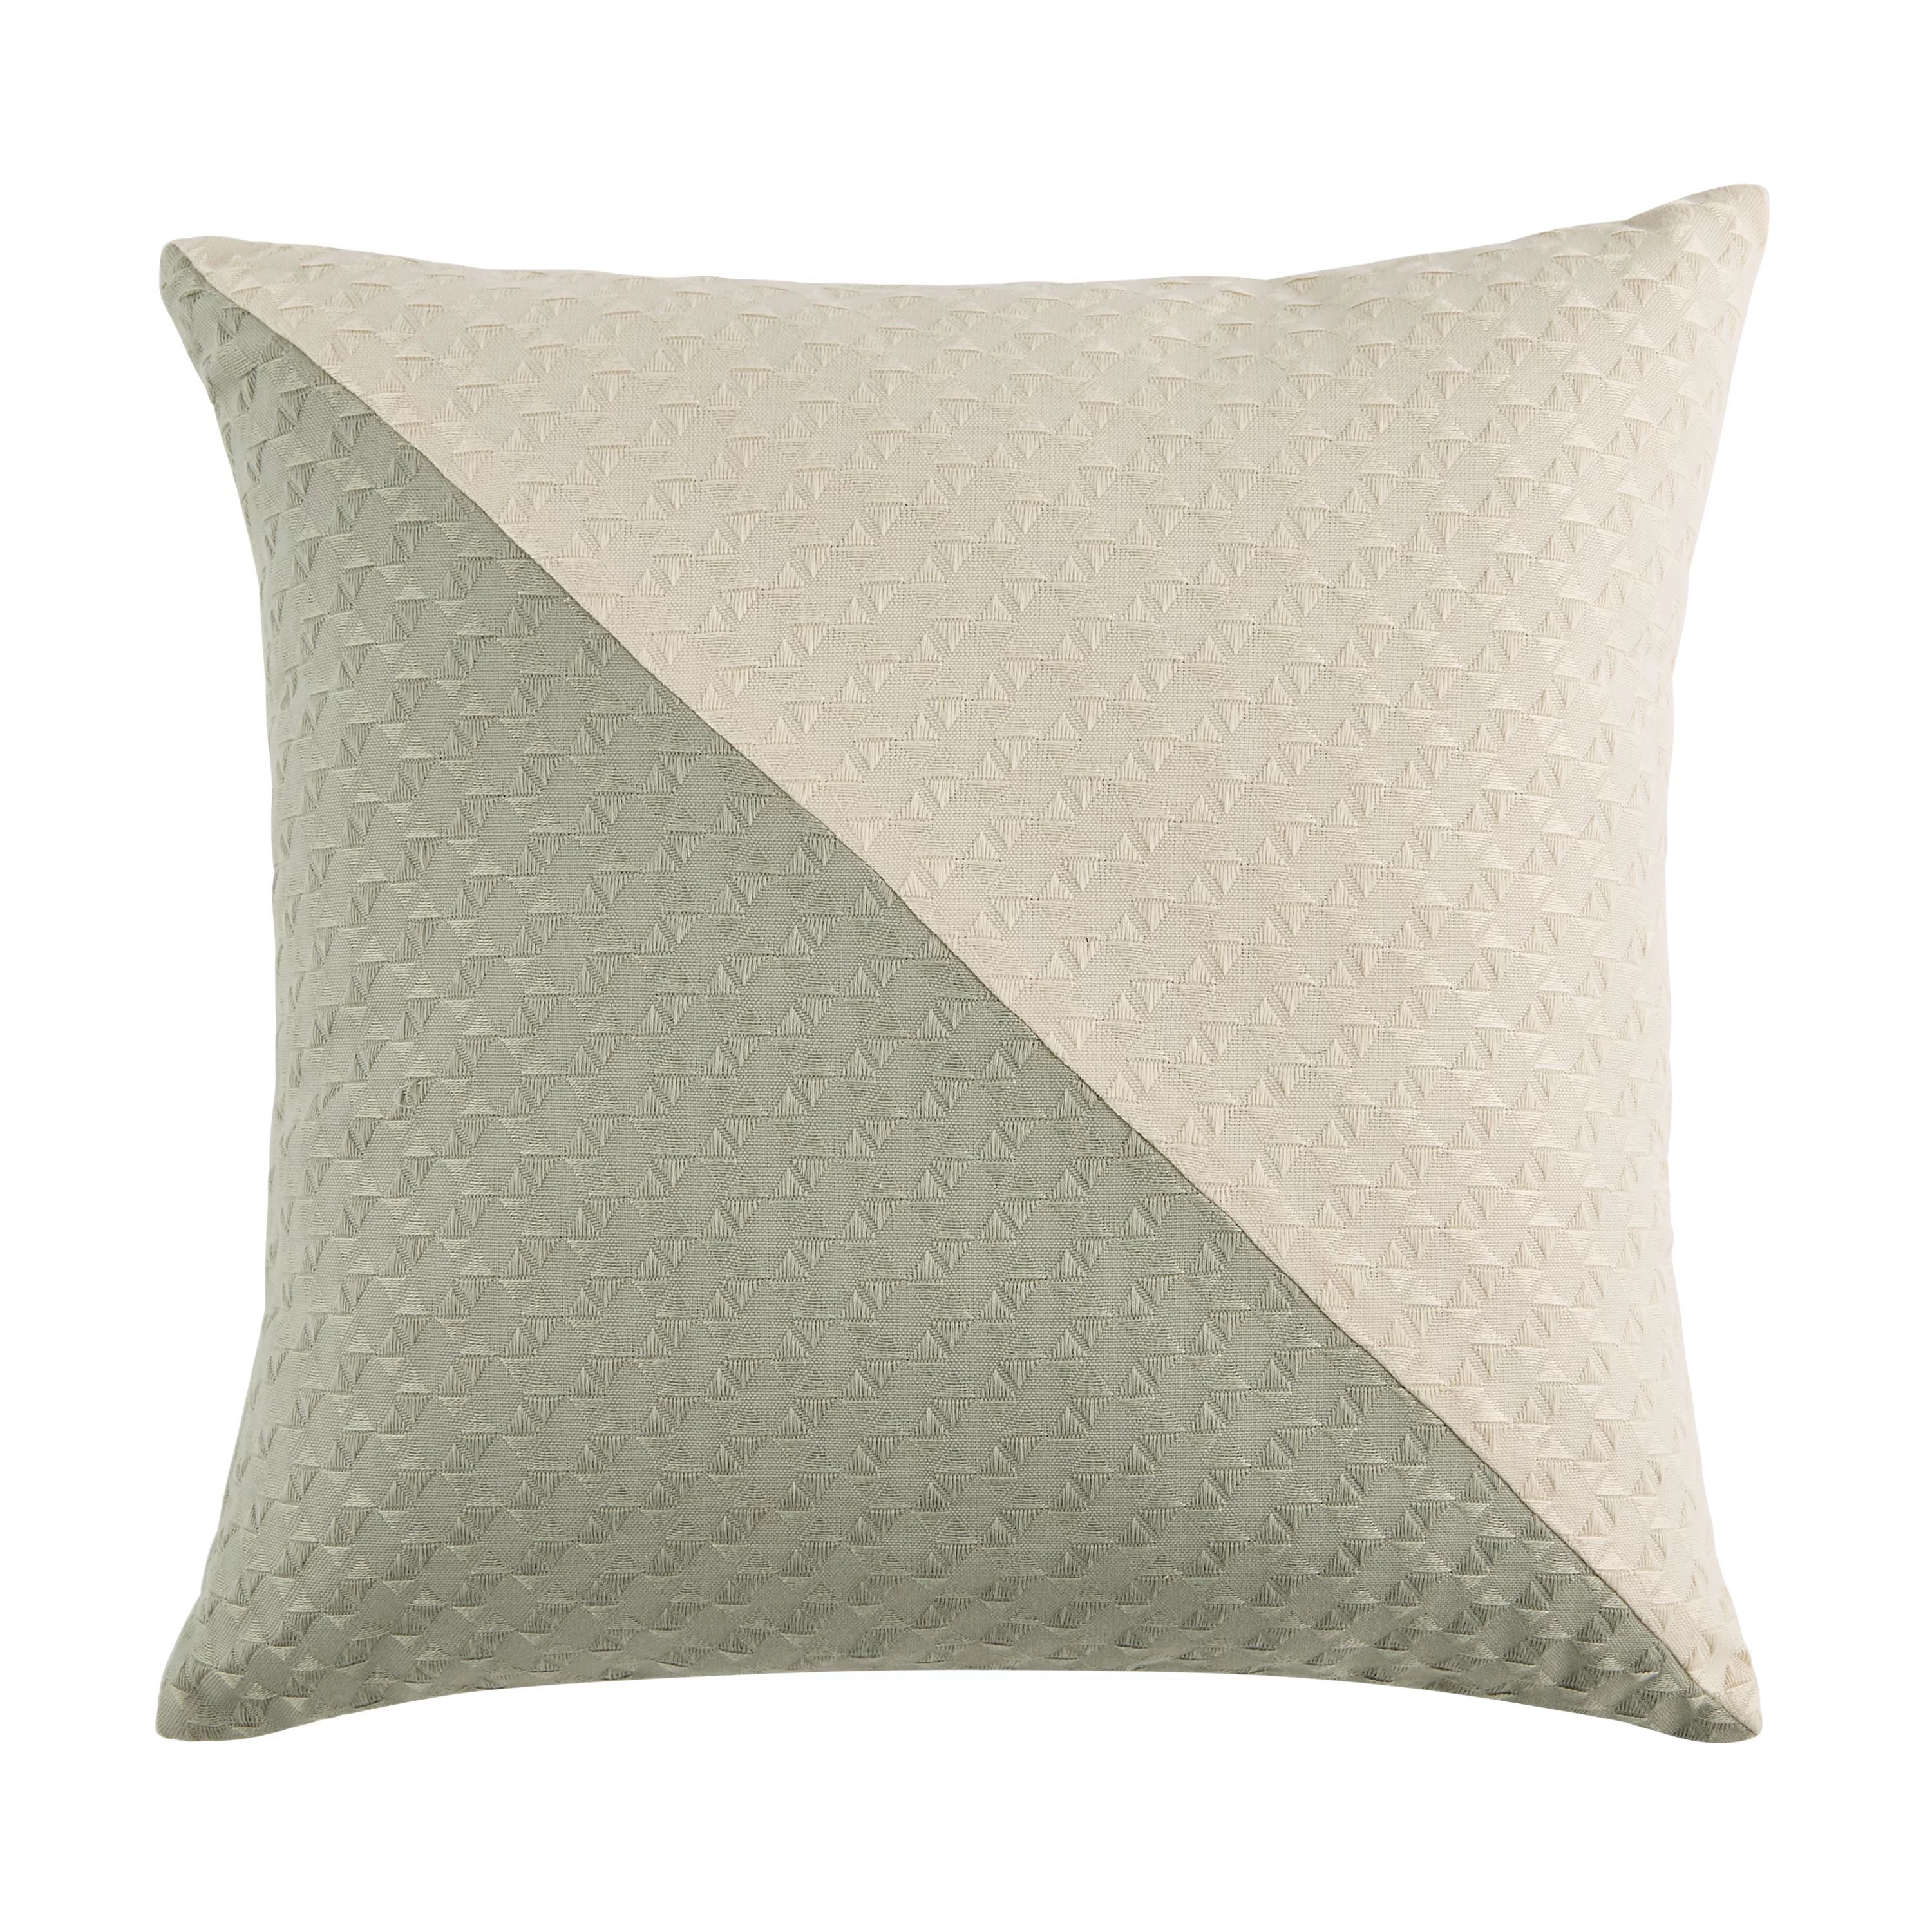 Better Homes & Gardens 20" x 20" Textured Color Block Outdoor Pillow by Dave & Jenny Marrs | Walmart (US)